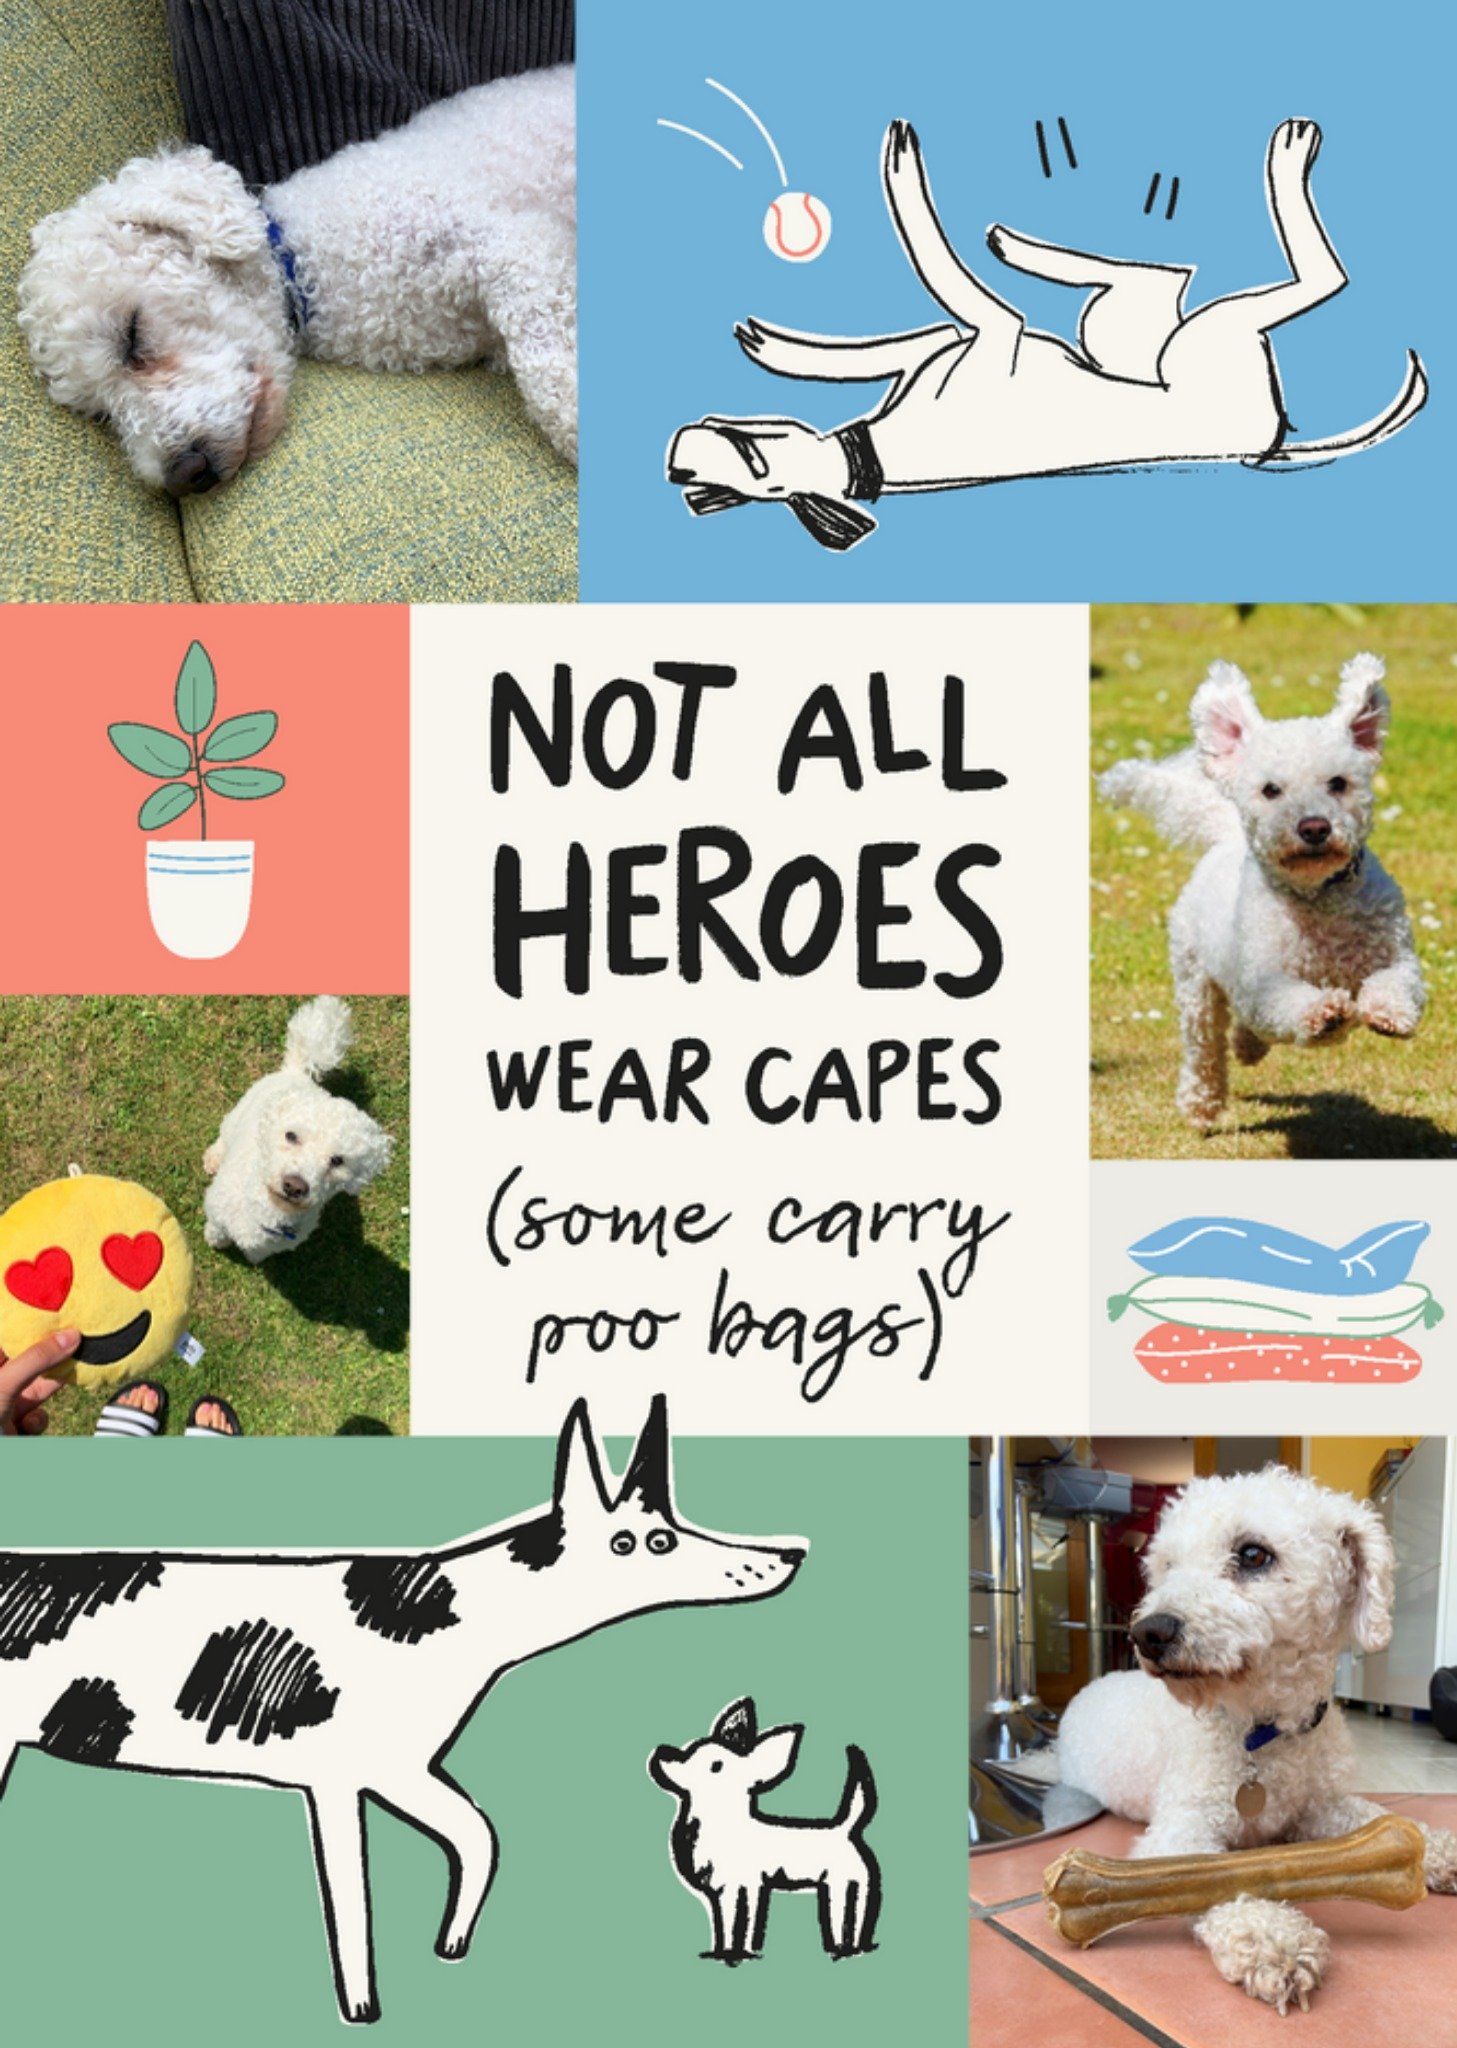 Moonpig Battersea Not All Heroes Wear Capes Cute Illustrated Dogs Photo Upload Card, Large